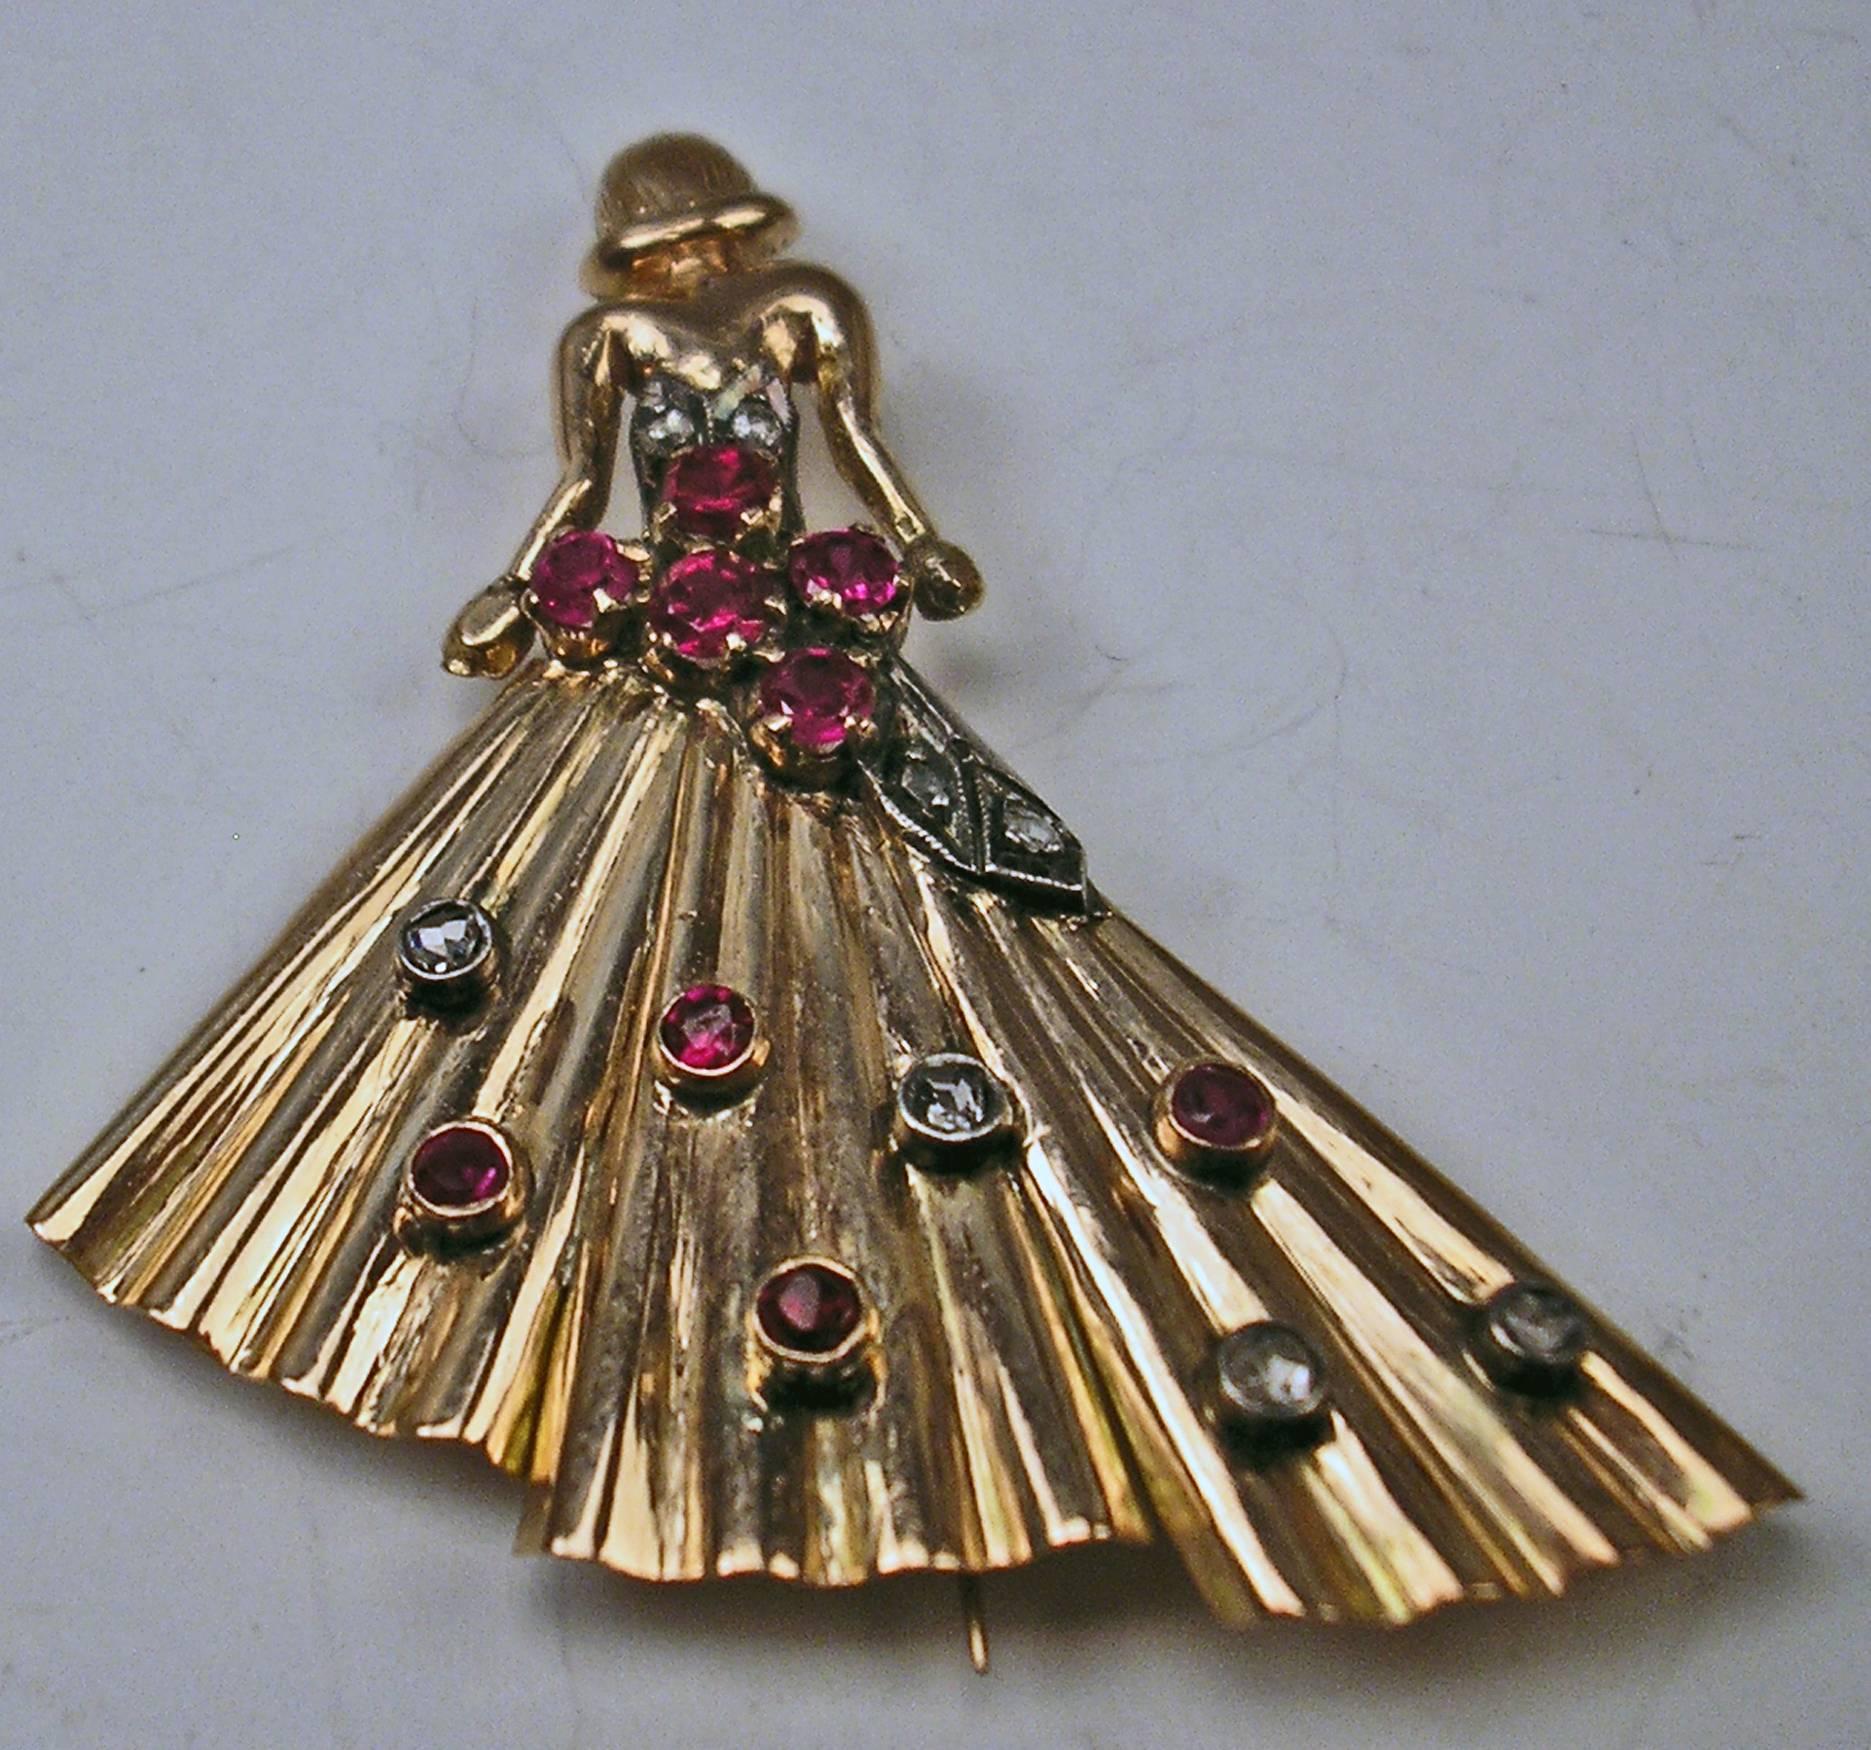 Finest golden brooch rarely shaped: LADY CLAD IN DINNER DRESS,
covered with various diamonds as well as with almandines.

GOLD  (14 CARAT GOLD / 585) - checked
Vienna, made circa 1925

Total height:  5.1 cm    2.00 inches

SHIPPING FEES:  